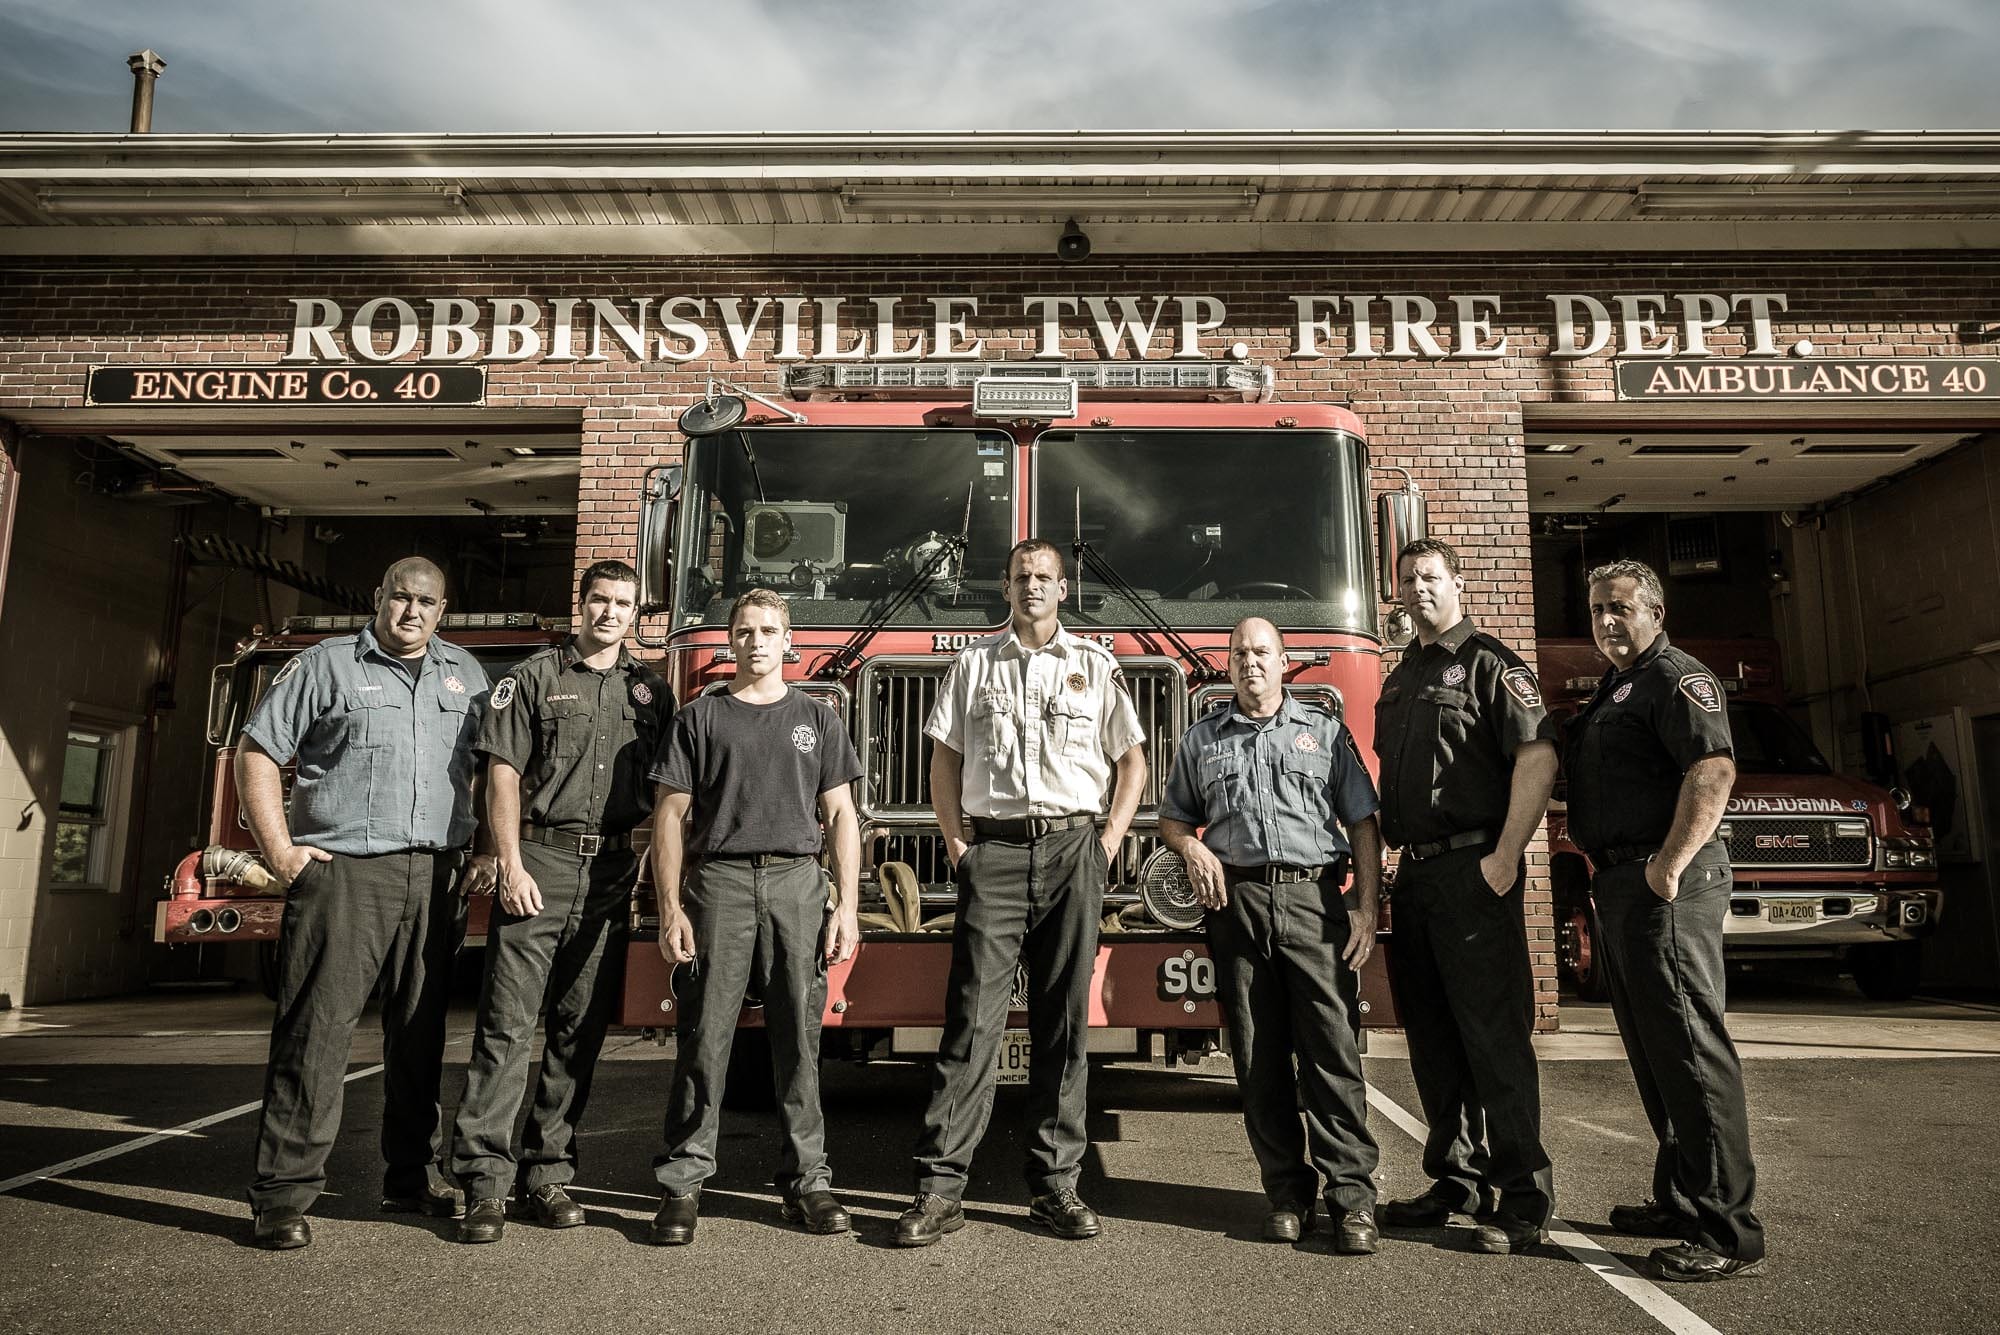 Robbinsville NJ firehouse and staff